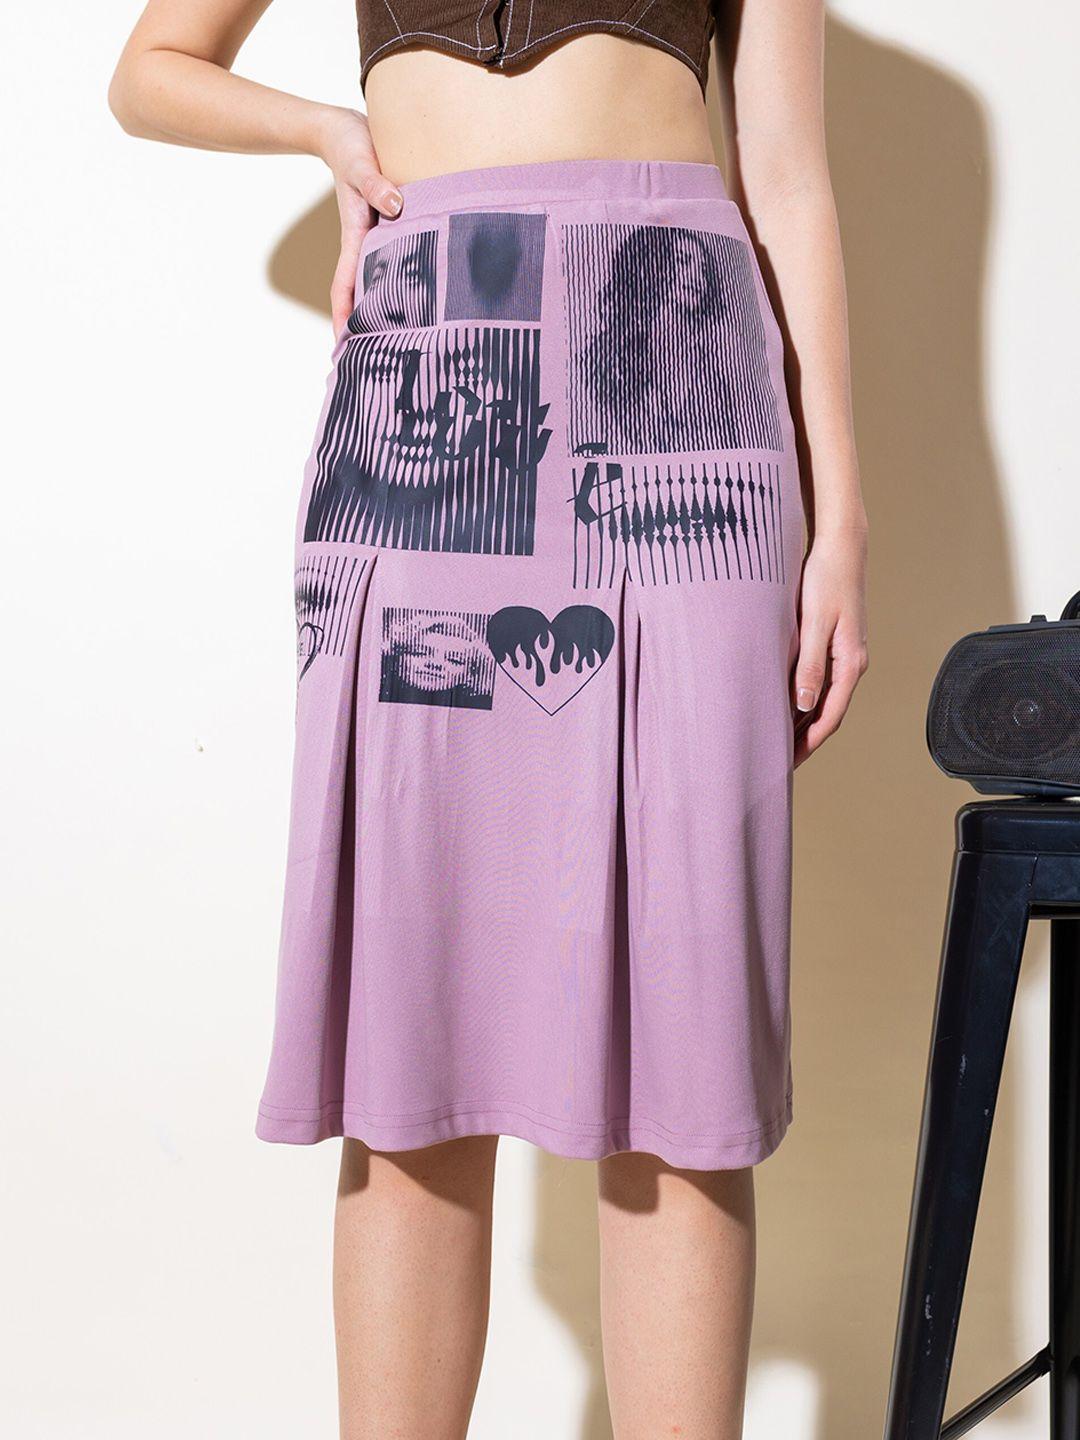 Stylecast X Hersheinbox Purple Graphic Printed A-Line Knee-Length Skirt With Pleats Detail